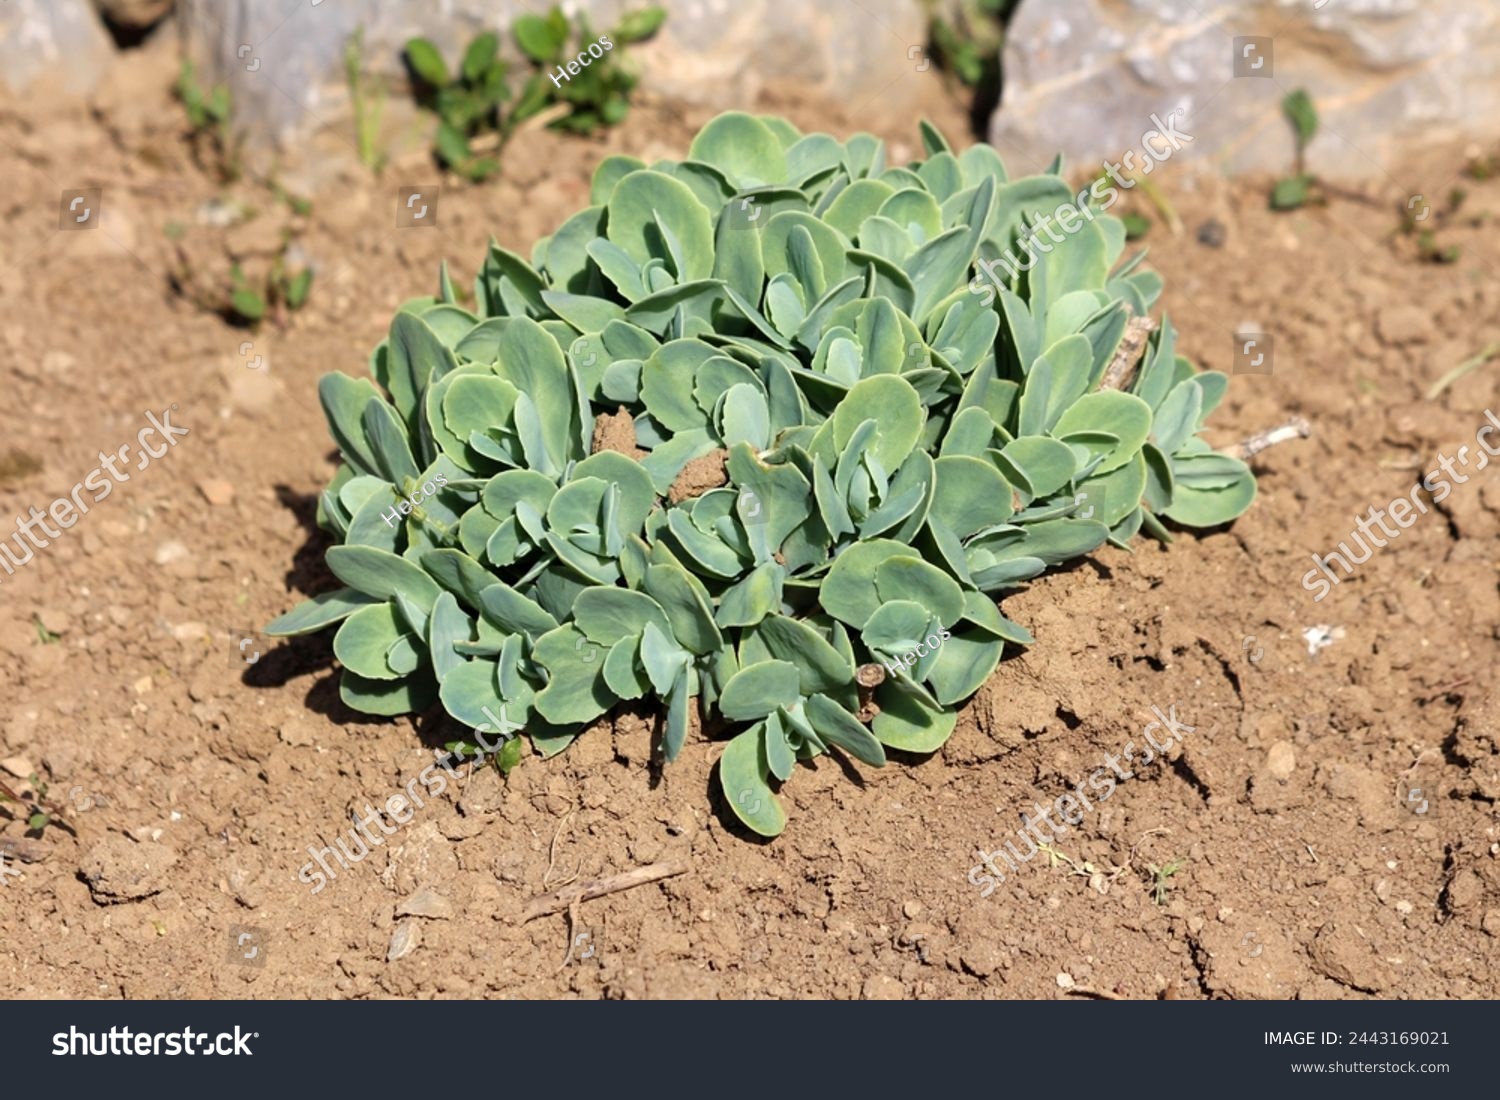 Homegrown Sedum or Stonecrop hardy succulent ground cover perennial green plant with thick succulent leaves and fleshy stems planted in local urban family home garden next to decorative rocks  #2443169021